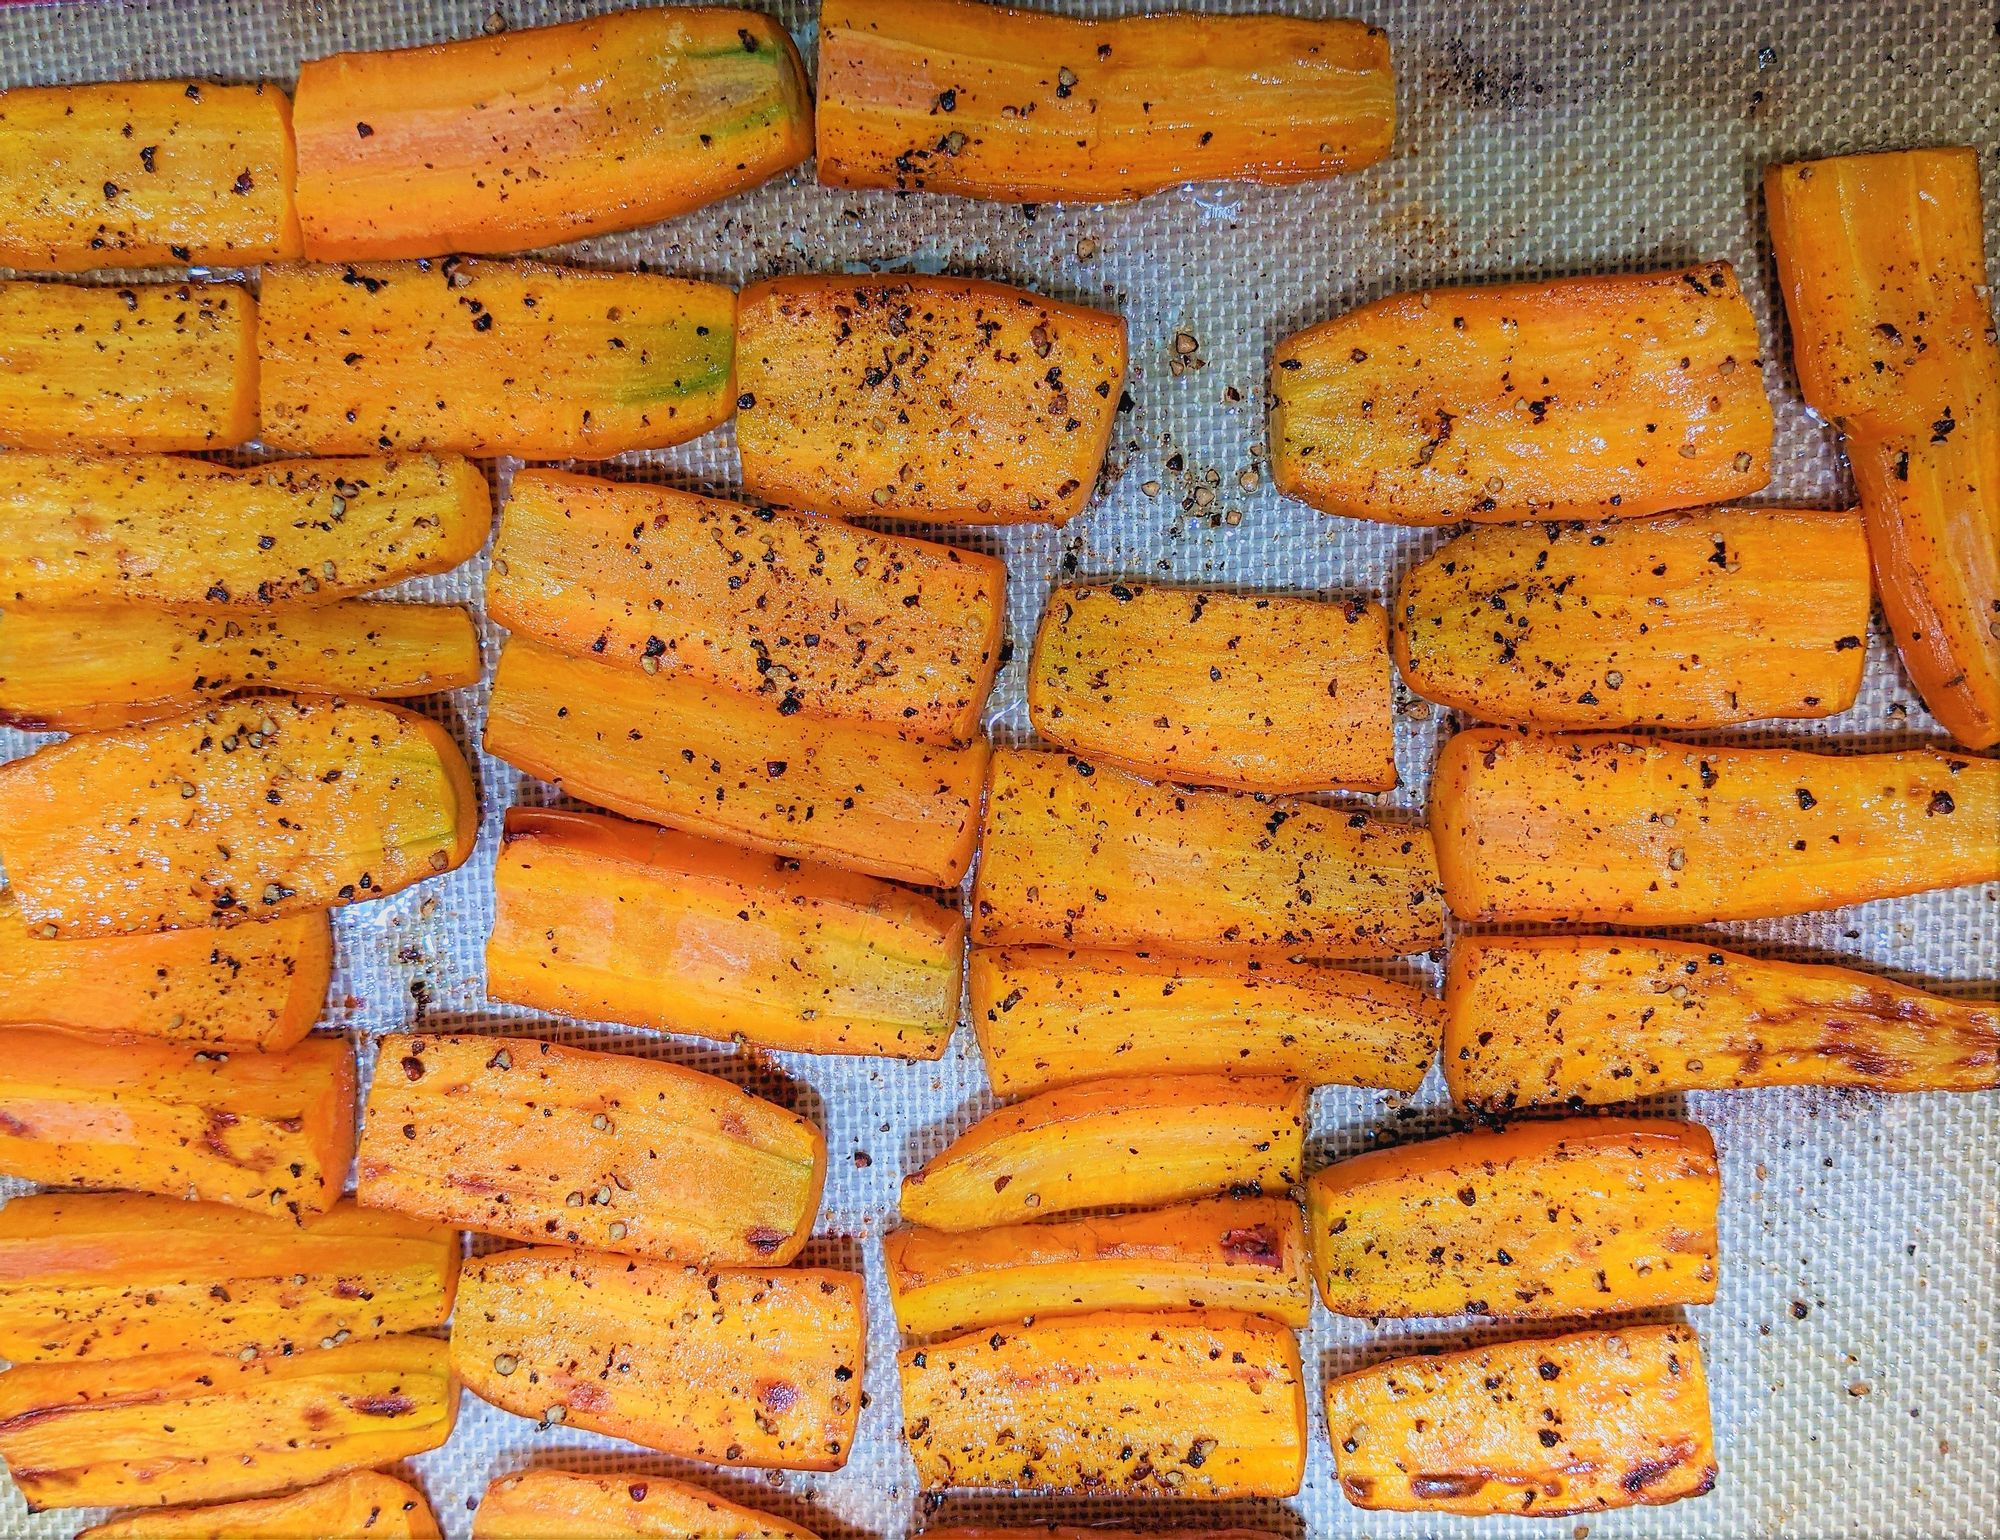 Roasted carrots featuring some maillard reaction browning